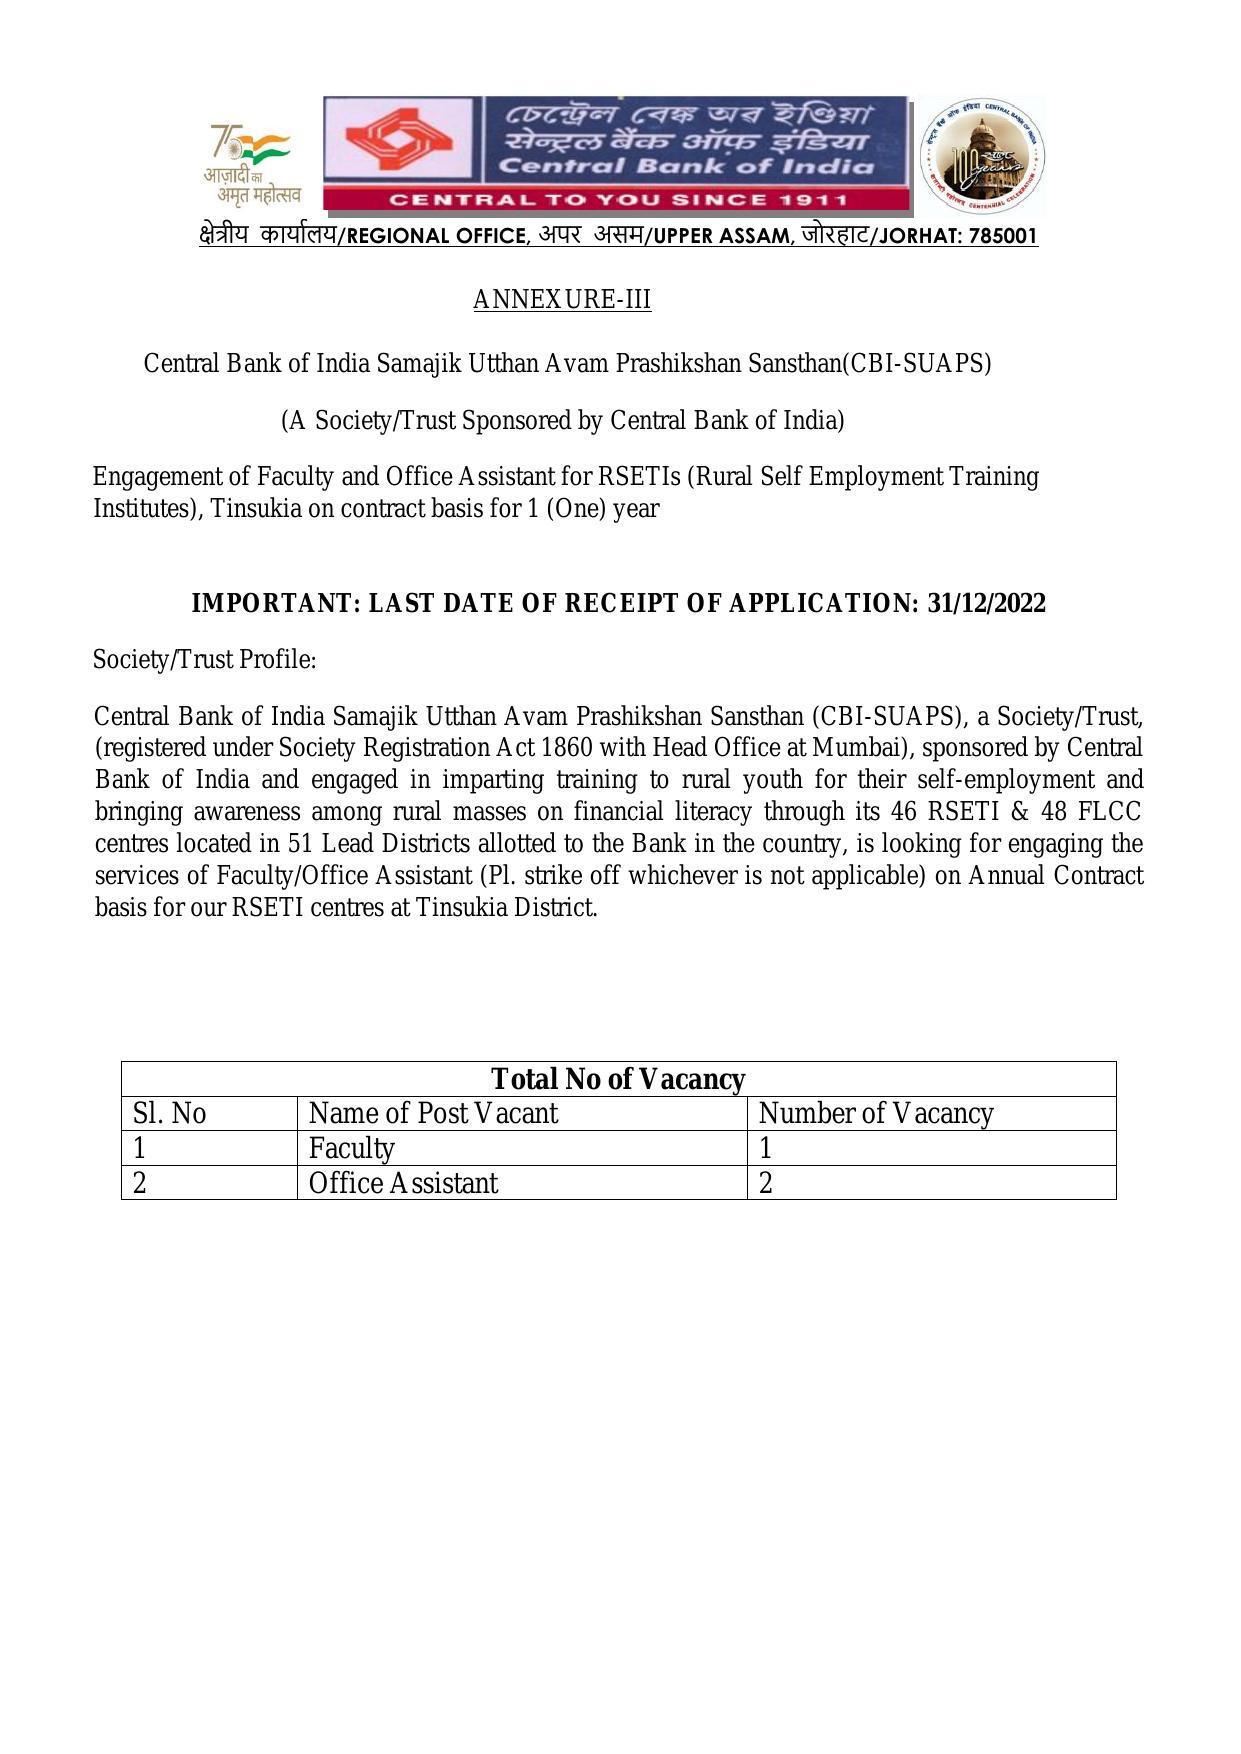 Central Bank of India Tinsukia Recruitment 2022 for Faculty, Office Assistant - Page 1